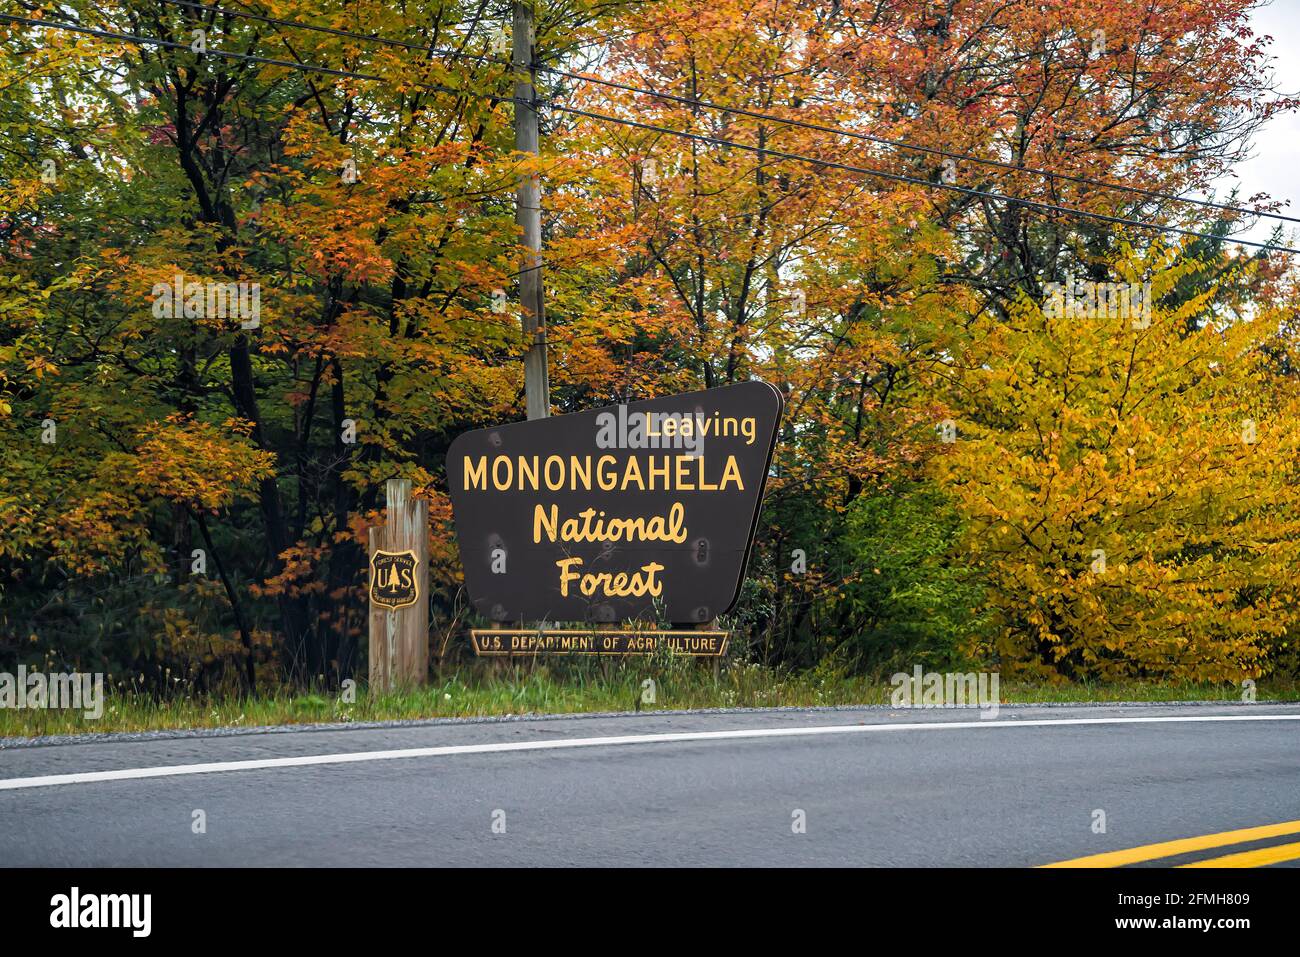 Sign on road for leaving Monongahela National Forest in Davis, West Virginia during colorful autumn fall season by USDA Stock Photo